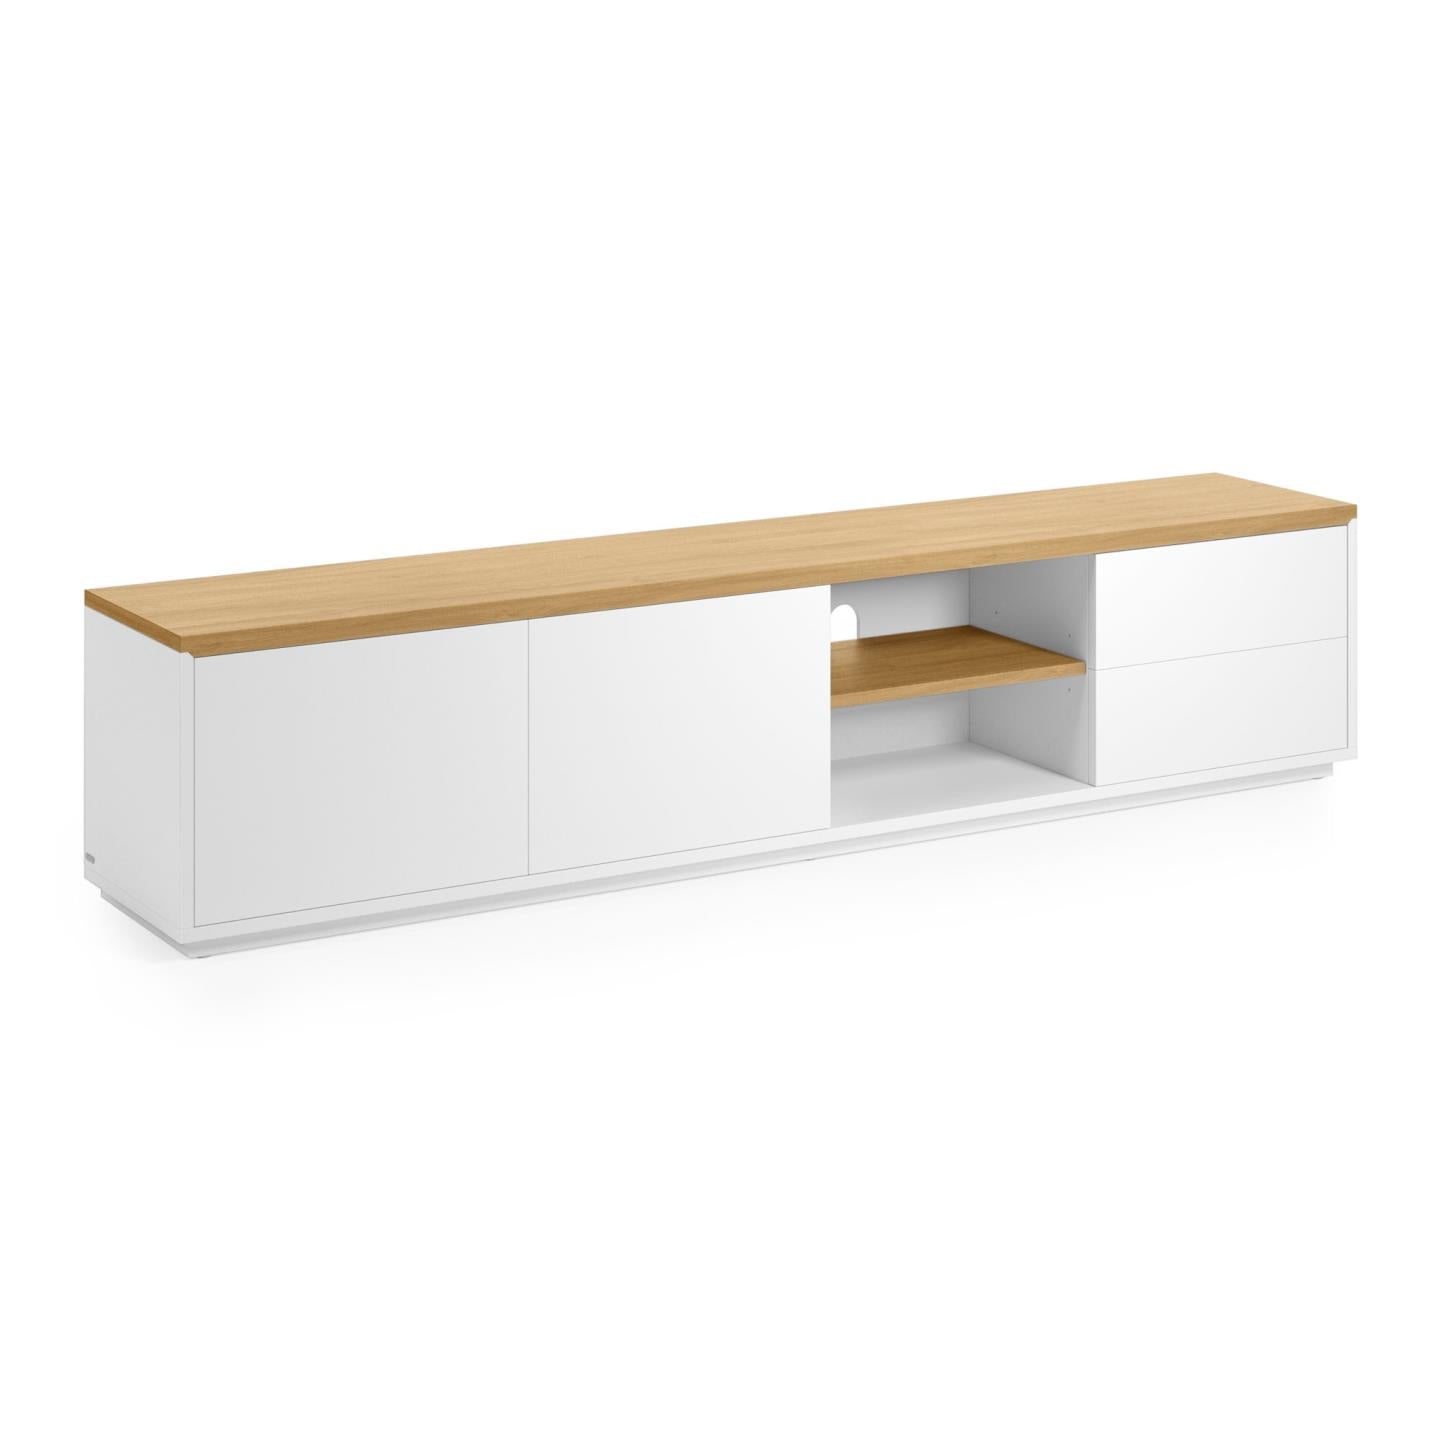 Abilen oak wood veneer TV stand with 2 doora and 2 drawers in white lacquer, 200 x 44 cm FSC 100%